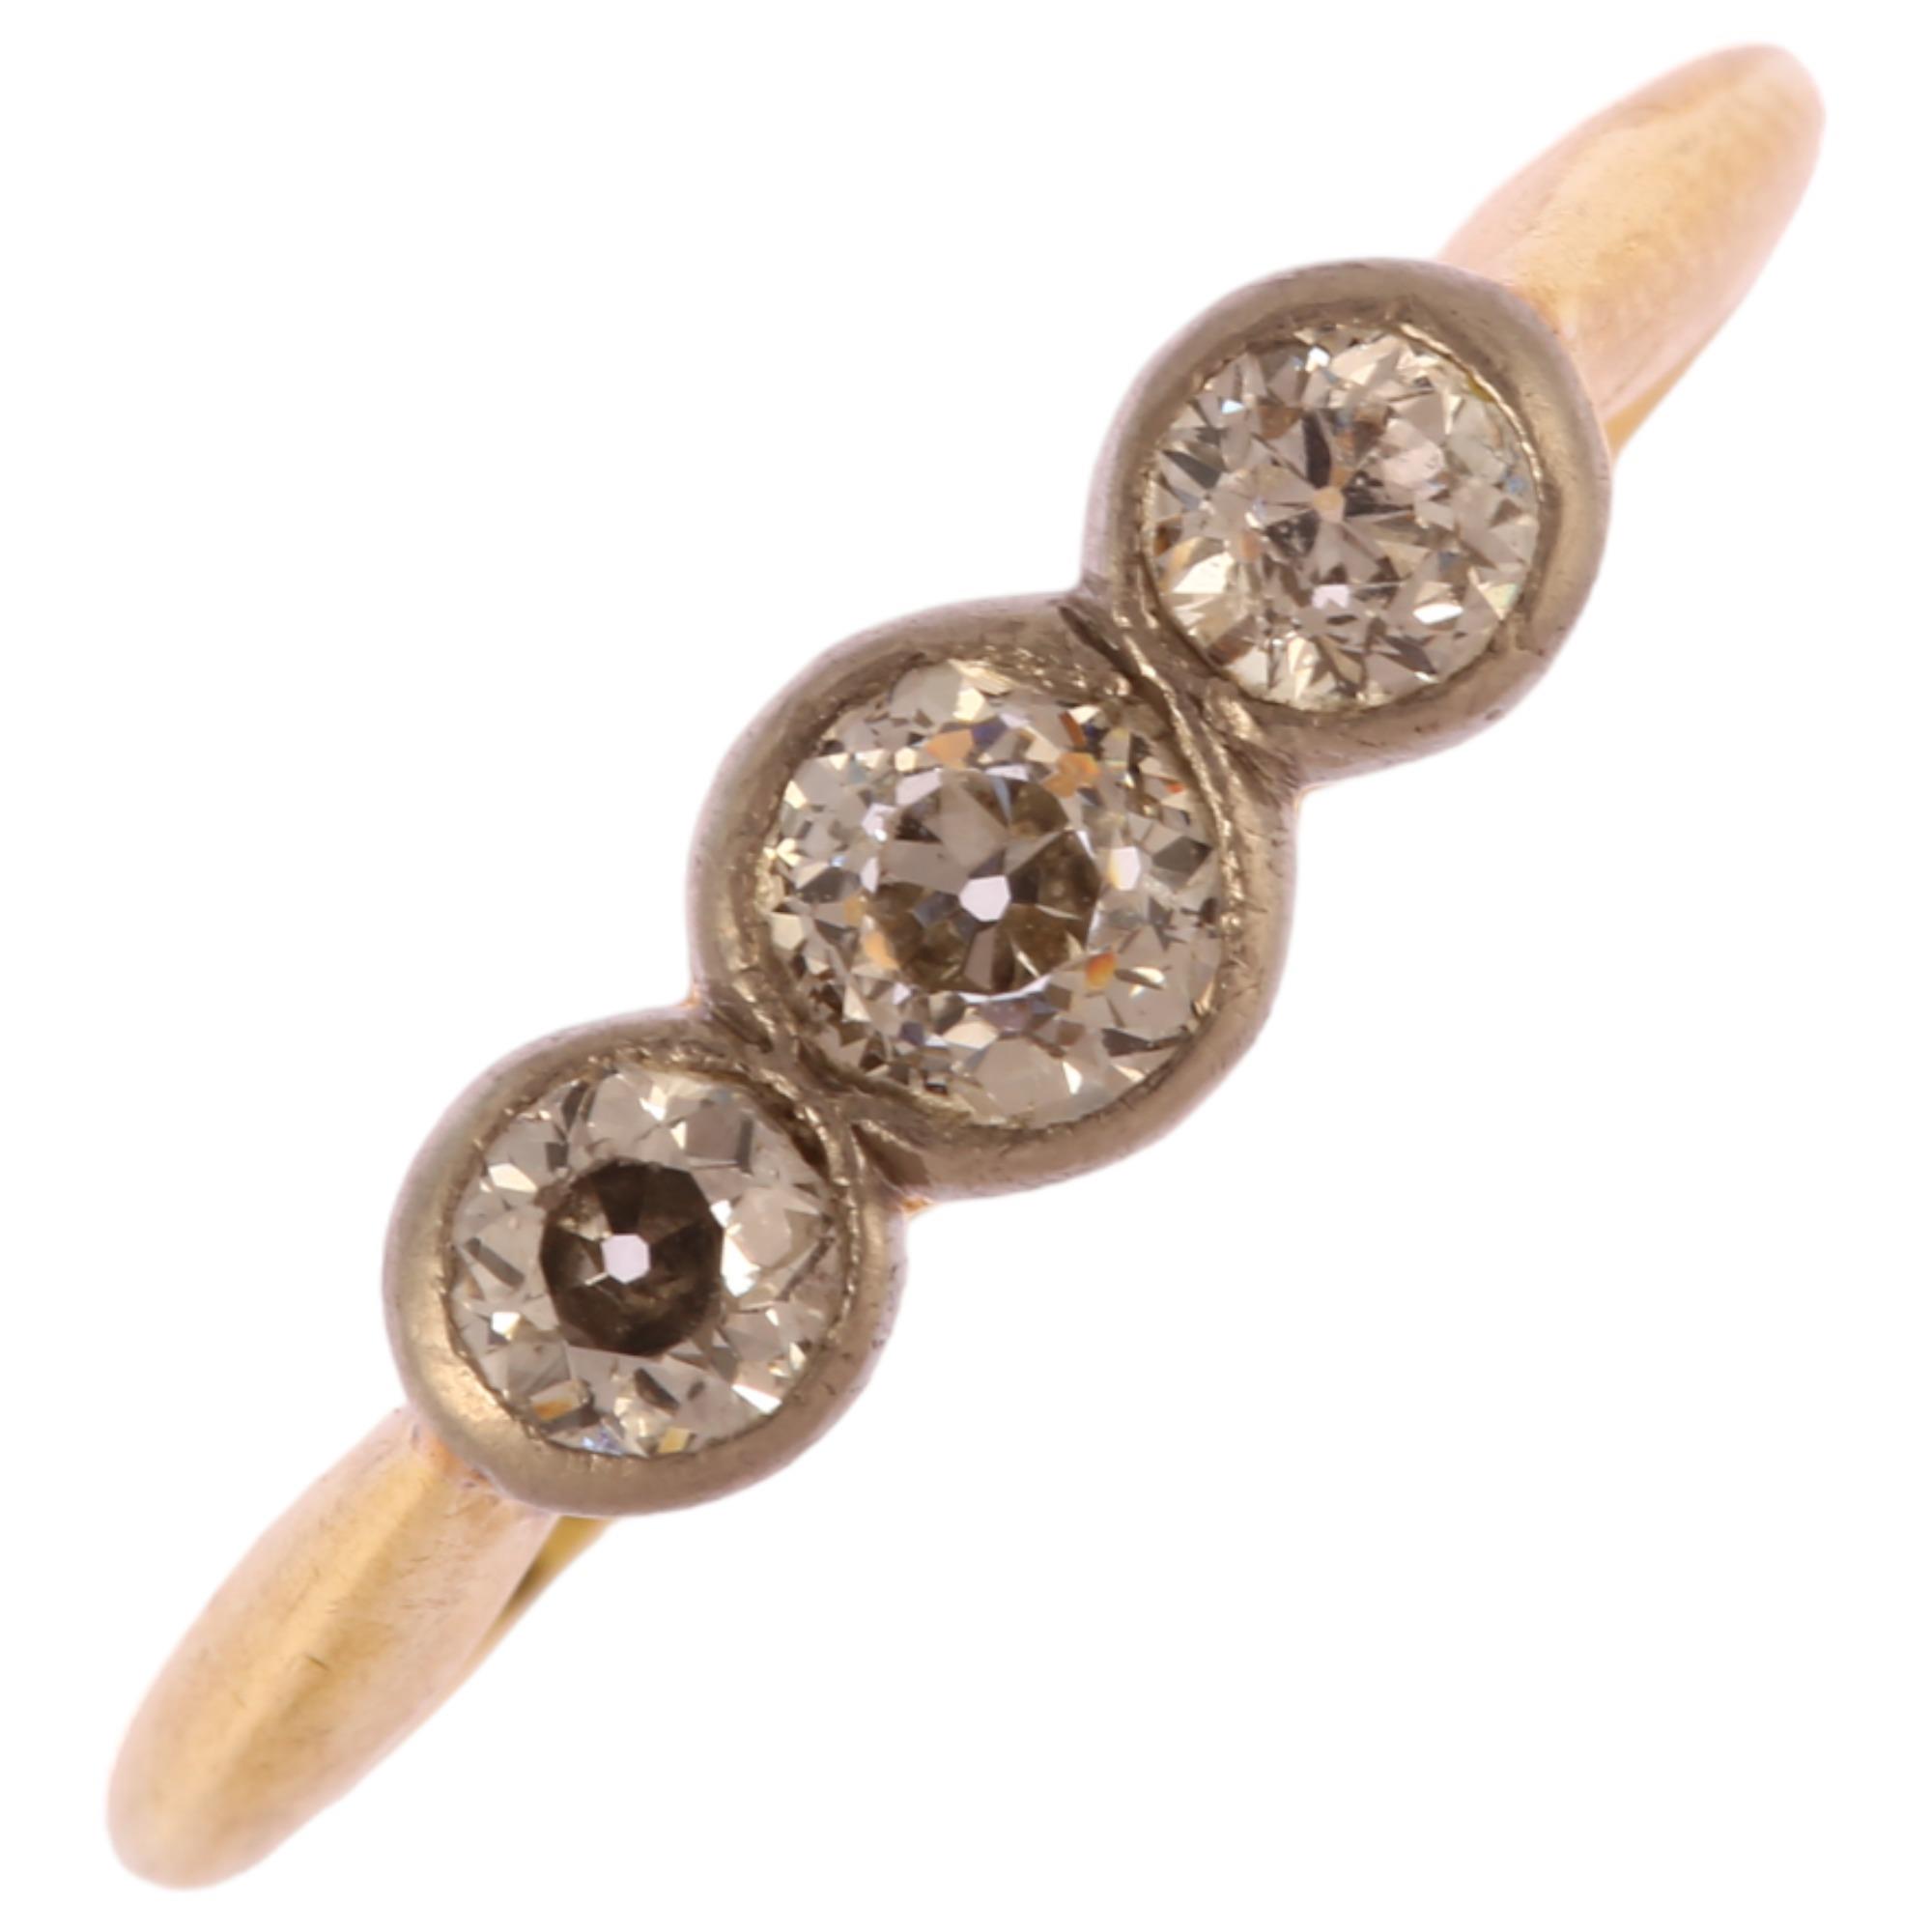 An early 20th century 18ct gold three stone diamond ring, bezel set with old European cut